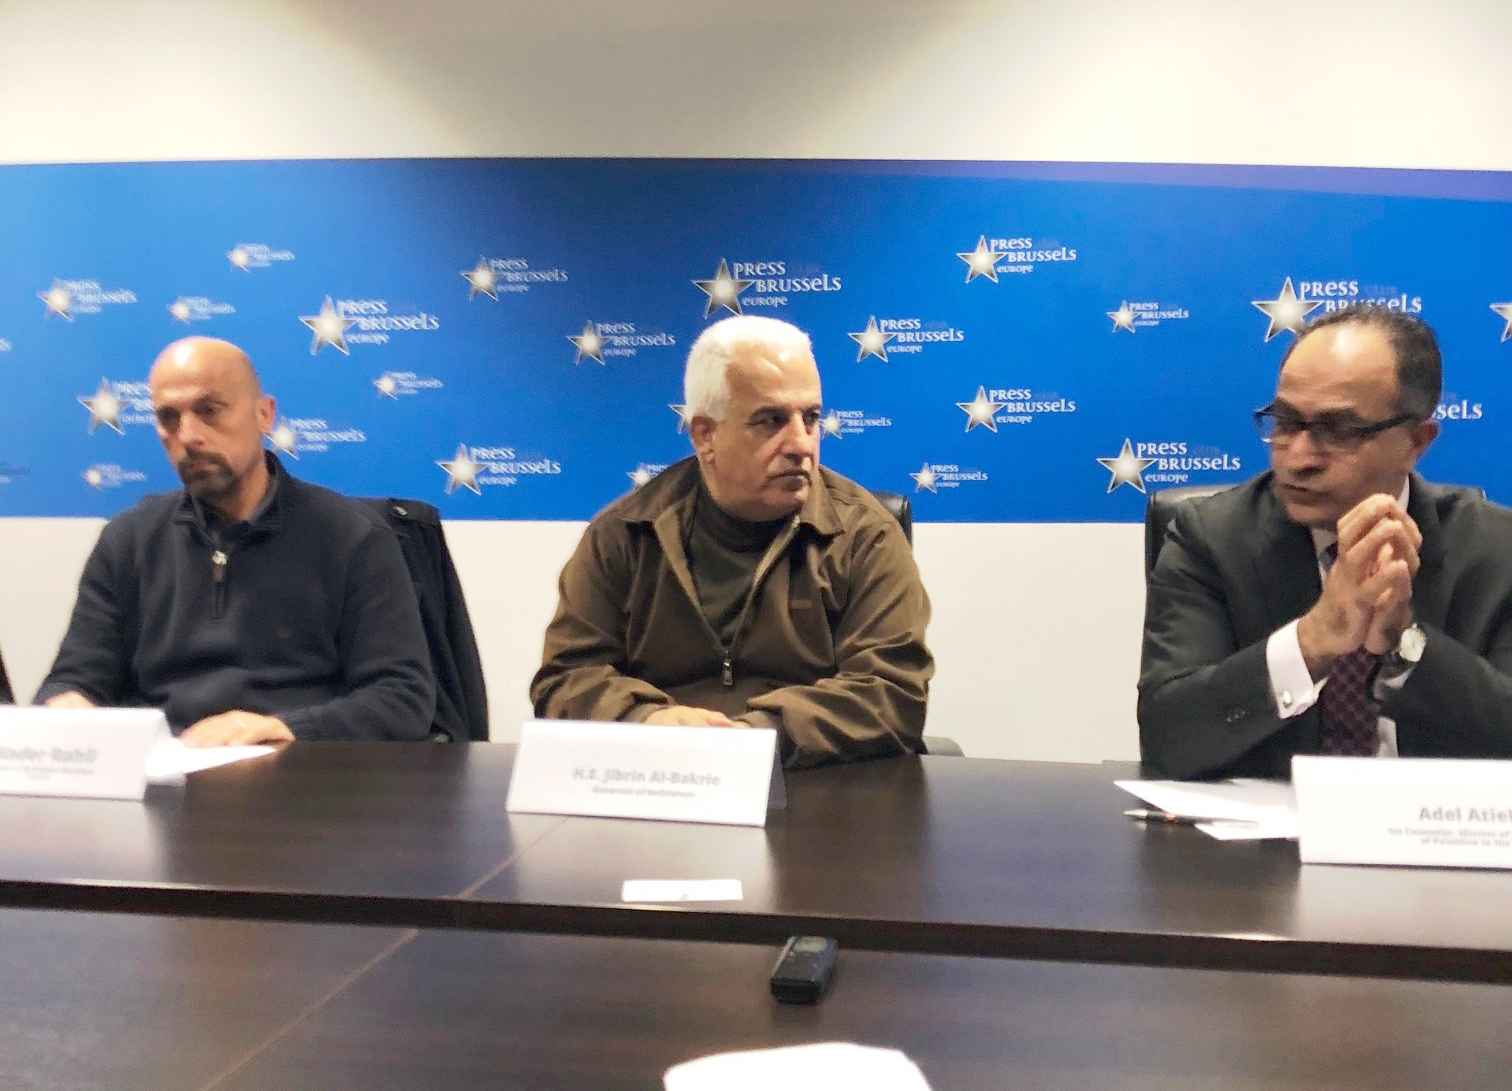 The governor of Bethlehem Jibrin Al-Bakrie during the press conference at the Brussels Press Club